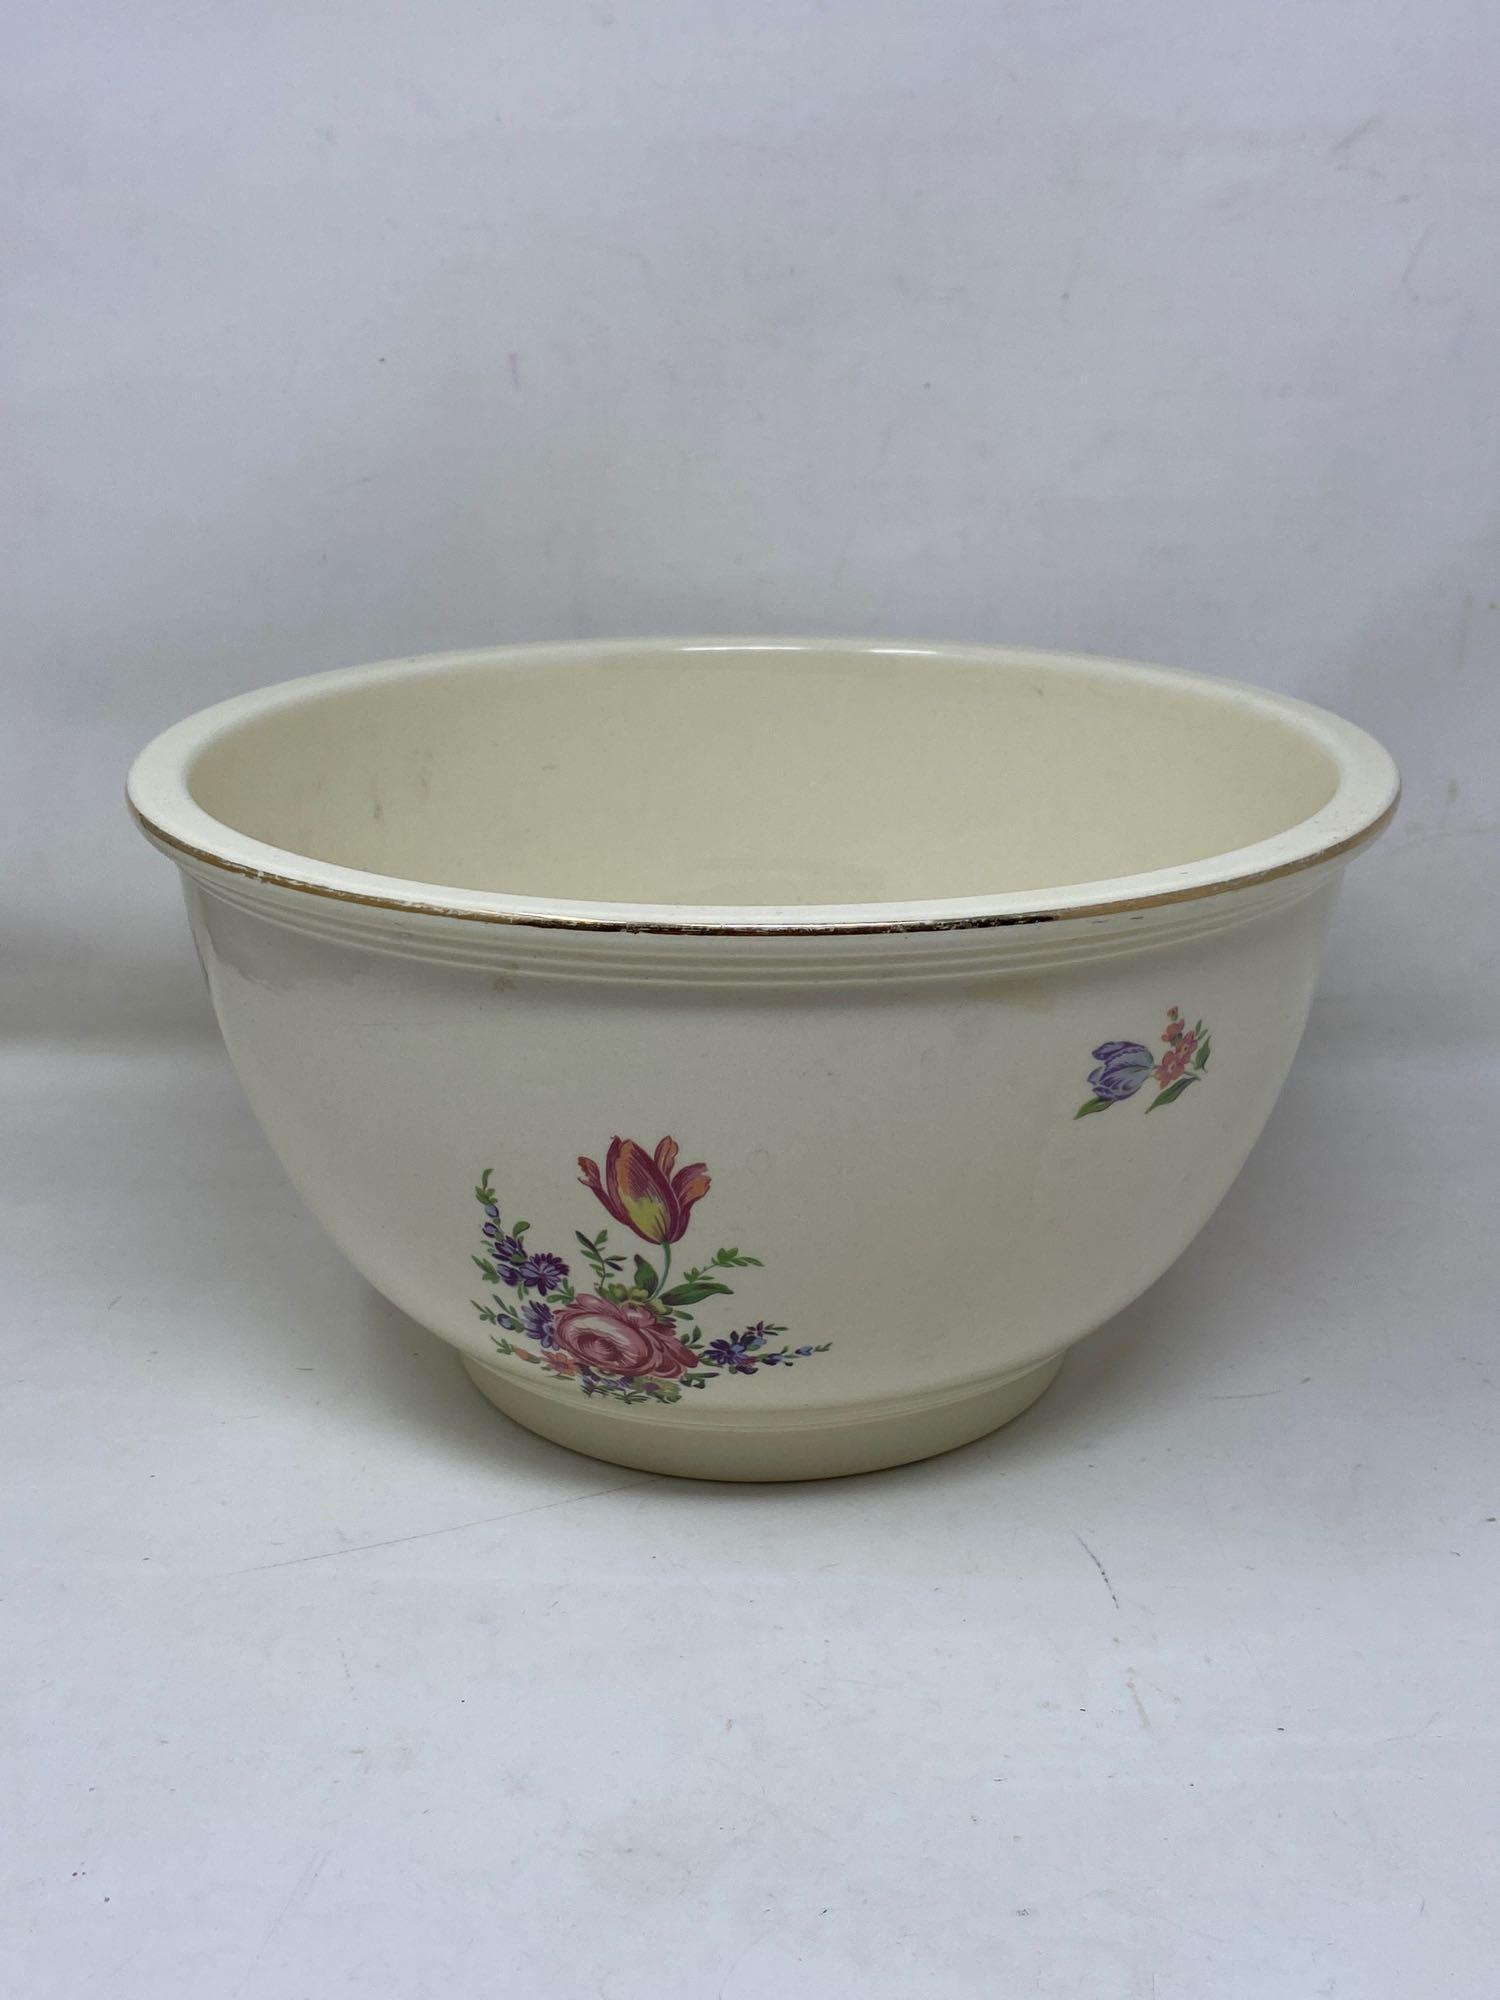 Floral Design Bowl, Plate and Pie Server